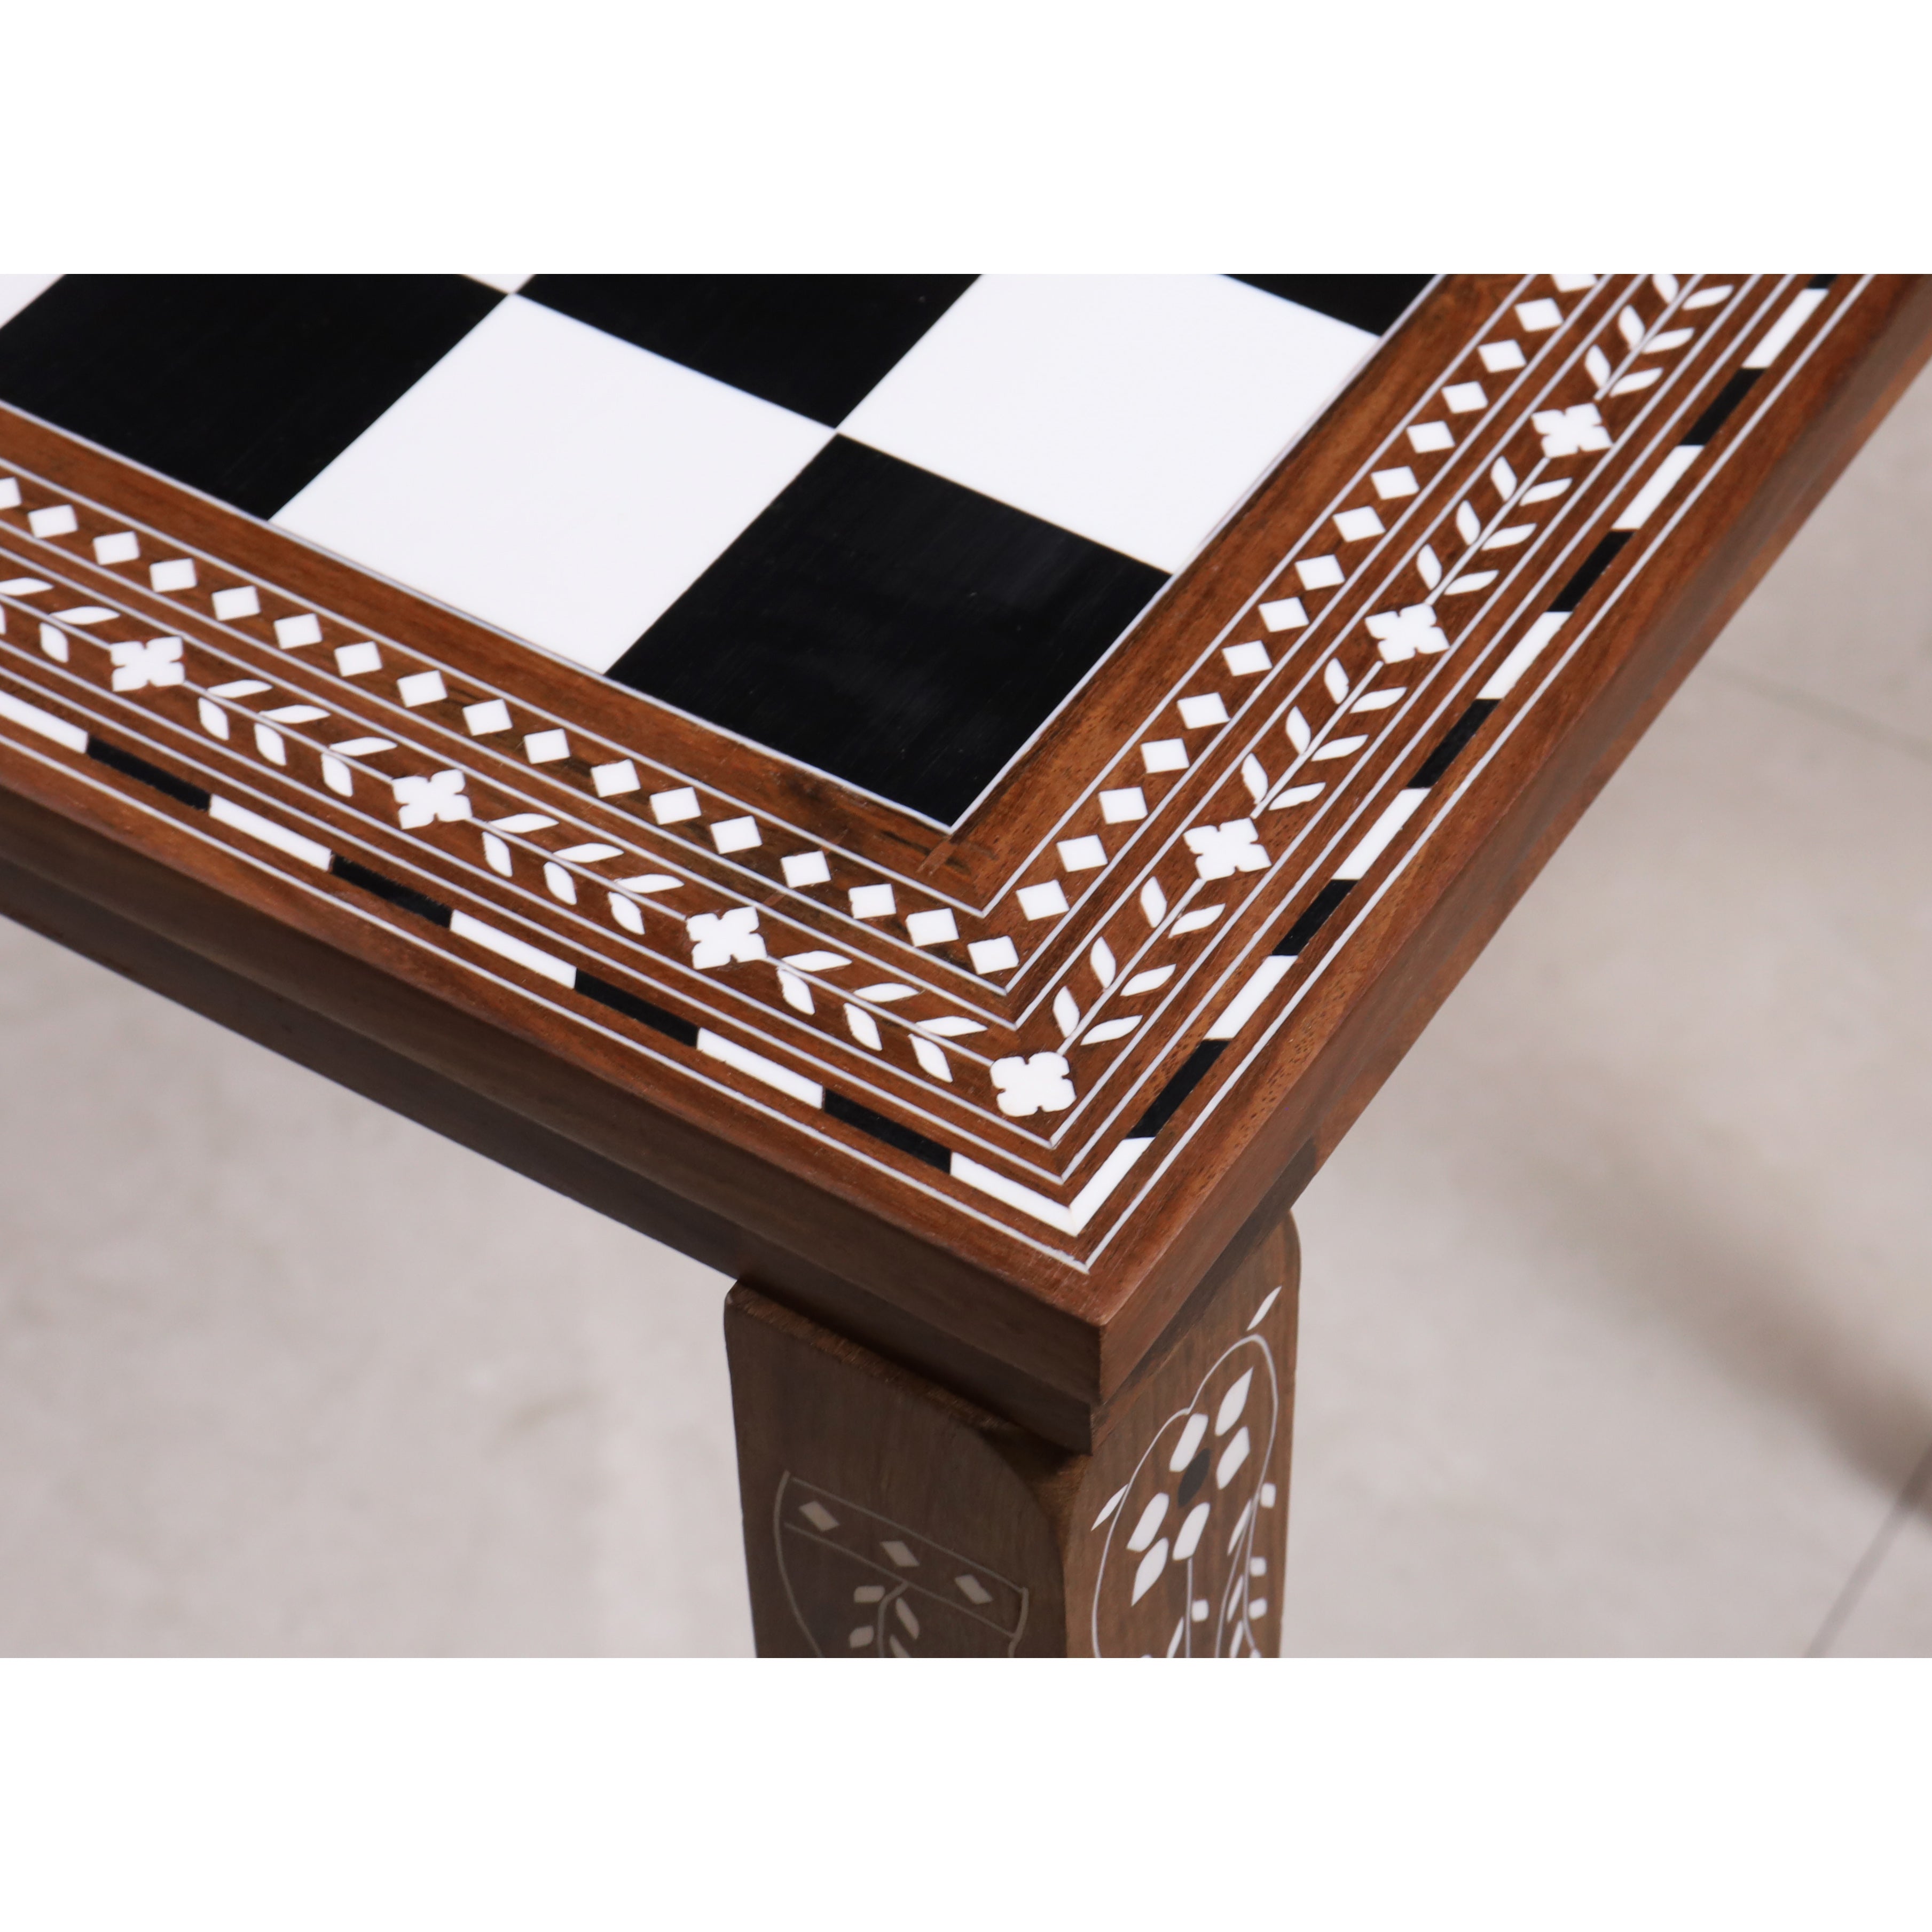 Wooden Chess Board Table - Royalchessmall 